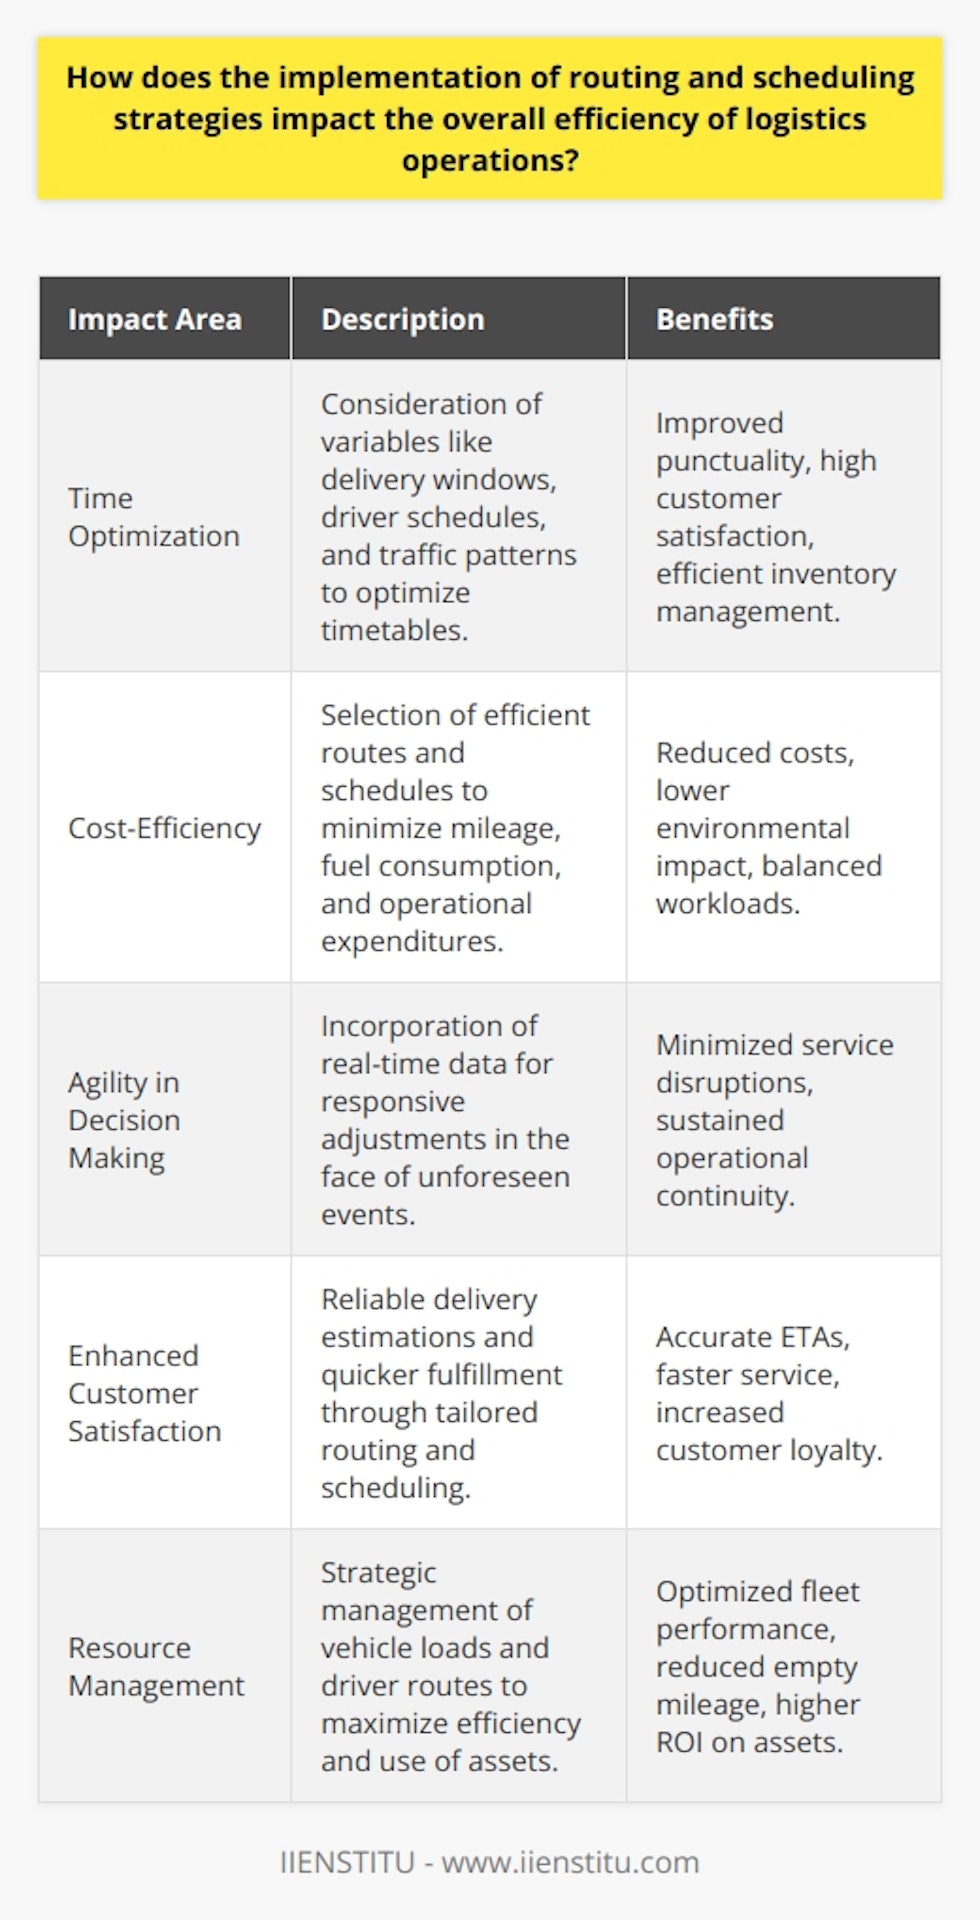 The sophistication of routing and scheduling strategies in logistics operations can significantly enhance the efficiency and robustness of supply chain management. By leveraging advanced algorithms and real-time data, companies can streamline their logistics operations to yield tangible improvements in the following areas:Time OptimizationScheduling strategies consider numerous variables, such as customer delivery windows, driver availability, traffic patterns, and vehicle maintenance schedules, to construct a timetable that maximizes service levels. Intelligent routing, meanwhile, aims to minimize delays caused by traffic, construction, or route-specific restrictions. The interplay between these strategies ensures the timely delivery of goods, which is paramount for maintaining high levels of customer satisfaction and sustaining tight inventory controls.Cost-EfficiencyRouting and scheduling have a direct correlation with overhead costs in logistics. By finding the most direct and efficient routes, companies can reduce mileage and fuel consumption, which lowers not only operational costs but also the environmental footprint. Furthermore, effective scheduling reduces overtime costs and enhances turnover times, leading to a more balanced workforce and vehicle utilization. This balanced approach avoids excessive wear and tear on equipment and reduces turnover rates among drivers due to burnout.Agility in Decision MakingAdvanced routing and scheduling systems incorporate real-time data, which allows logistics operations to respond swiftly to unexpected events, such as vehicle breakdowns, last-minute order changes, or road closures. This agility in decision-making minimizes disruptions to the service flow and allows companies to maintain operational continuity.Enhanced Customer SatisfactionThe ability to provide reliable estimated times of arrival and quicker deliveries is essential in enhancing customer service. By utilizing sophisticated routing and scheduling strategies, companies can achieve a higher degree of accuracy in delivery estimations, offer faster order fulfillment, and provide flexibility in meeting customer demands.Resource ManagementOptimized routing and resource scheduling enable firms to improve the management of their assets. This is achieved by maximizing vehicle load capacity, minimizing empty runs, and ensuring drivers' routes are planned efficiently to avoid unnecessary overlap or downtime. By aligning resources with actual needs, companies can manage their fleets more effectively, leading to better return on investment on assets.In alignment with these points, IIENSTITU offers courses and resources that help professionals understand and apply the principles that underpin routing and scheduling strategies in logistics. Their expert-led training can equip individuals with the latest tools and methodologies to drive improvements in logistics operations, ensuring that the above benefits are realized.Ultimately, the sophistication and dynamic nature of routing and scheduling are pivotal in shaping logistics operations of the future. By continuously improving these strategies, logistics providers can ensure that efficiency, sustainability, and customer-centricity are at the core of their service offerings.